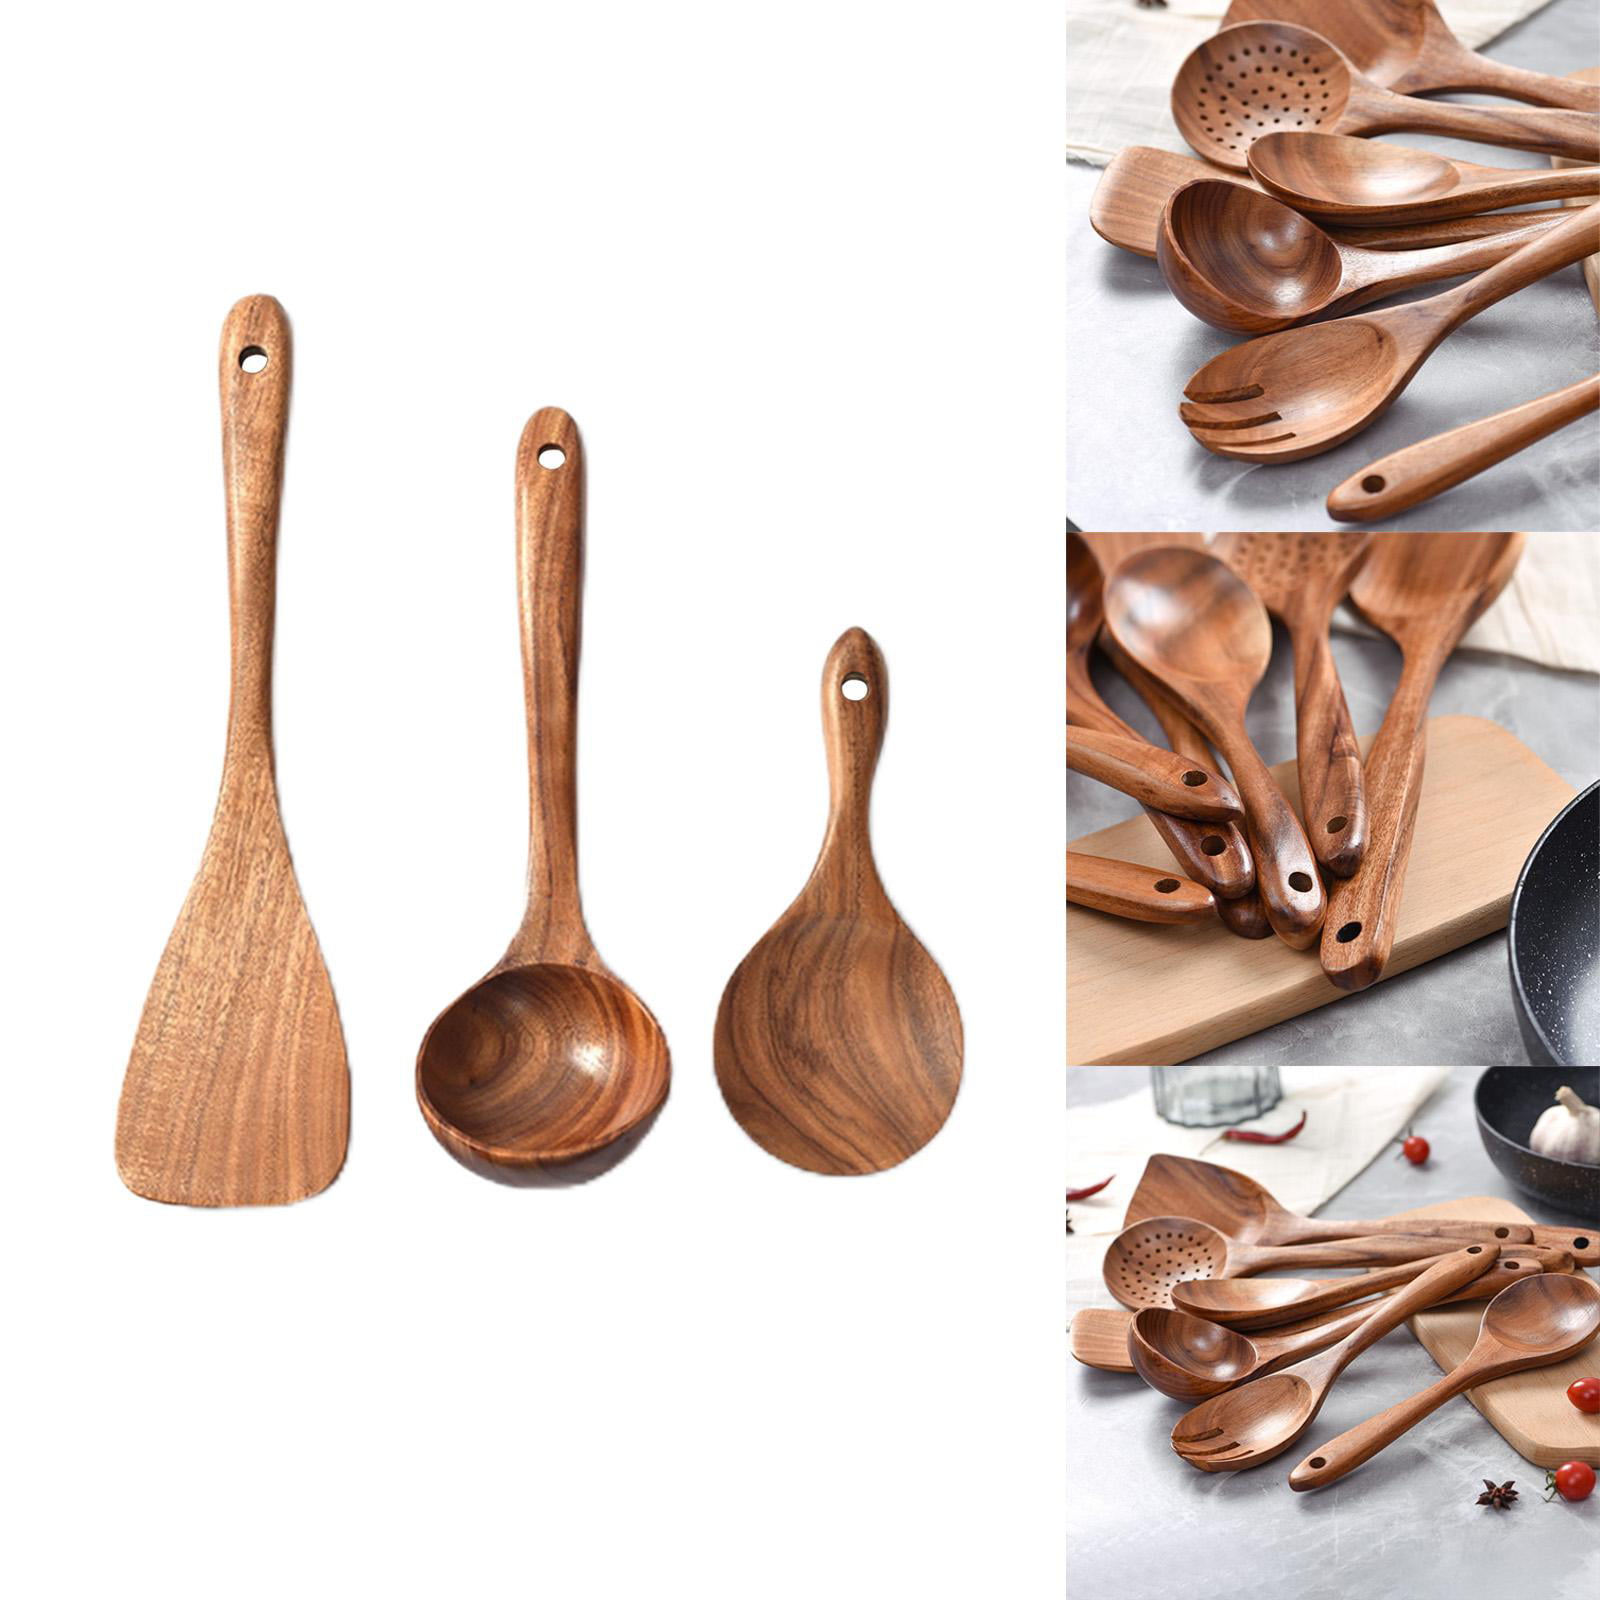 Discover 17 of the Best Japanese Wooden Kitchen Tools – Japanese Taste